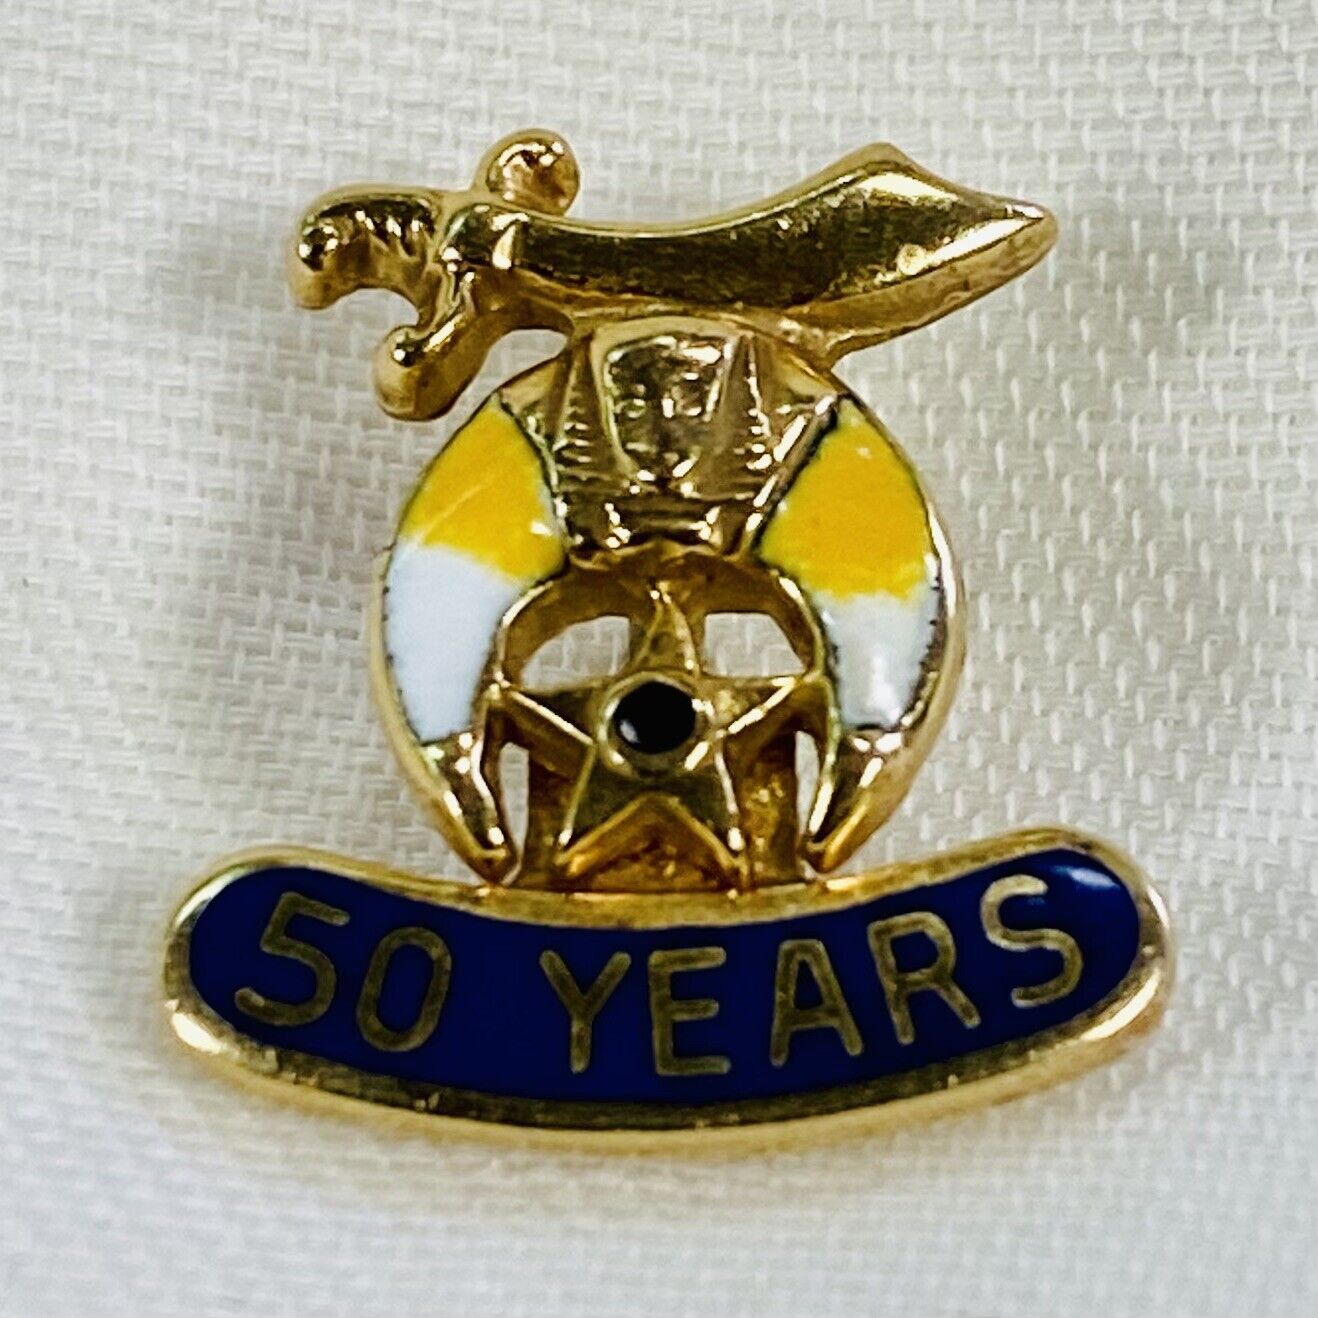 Vintage Shriners Pin- 50 Years- 10kt Gold and Enamel- No Reserve